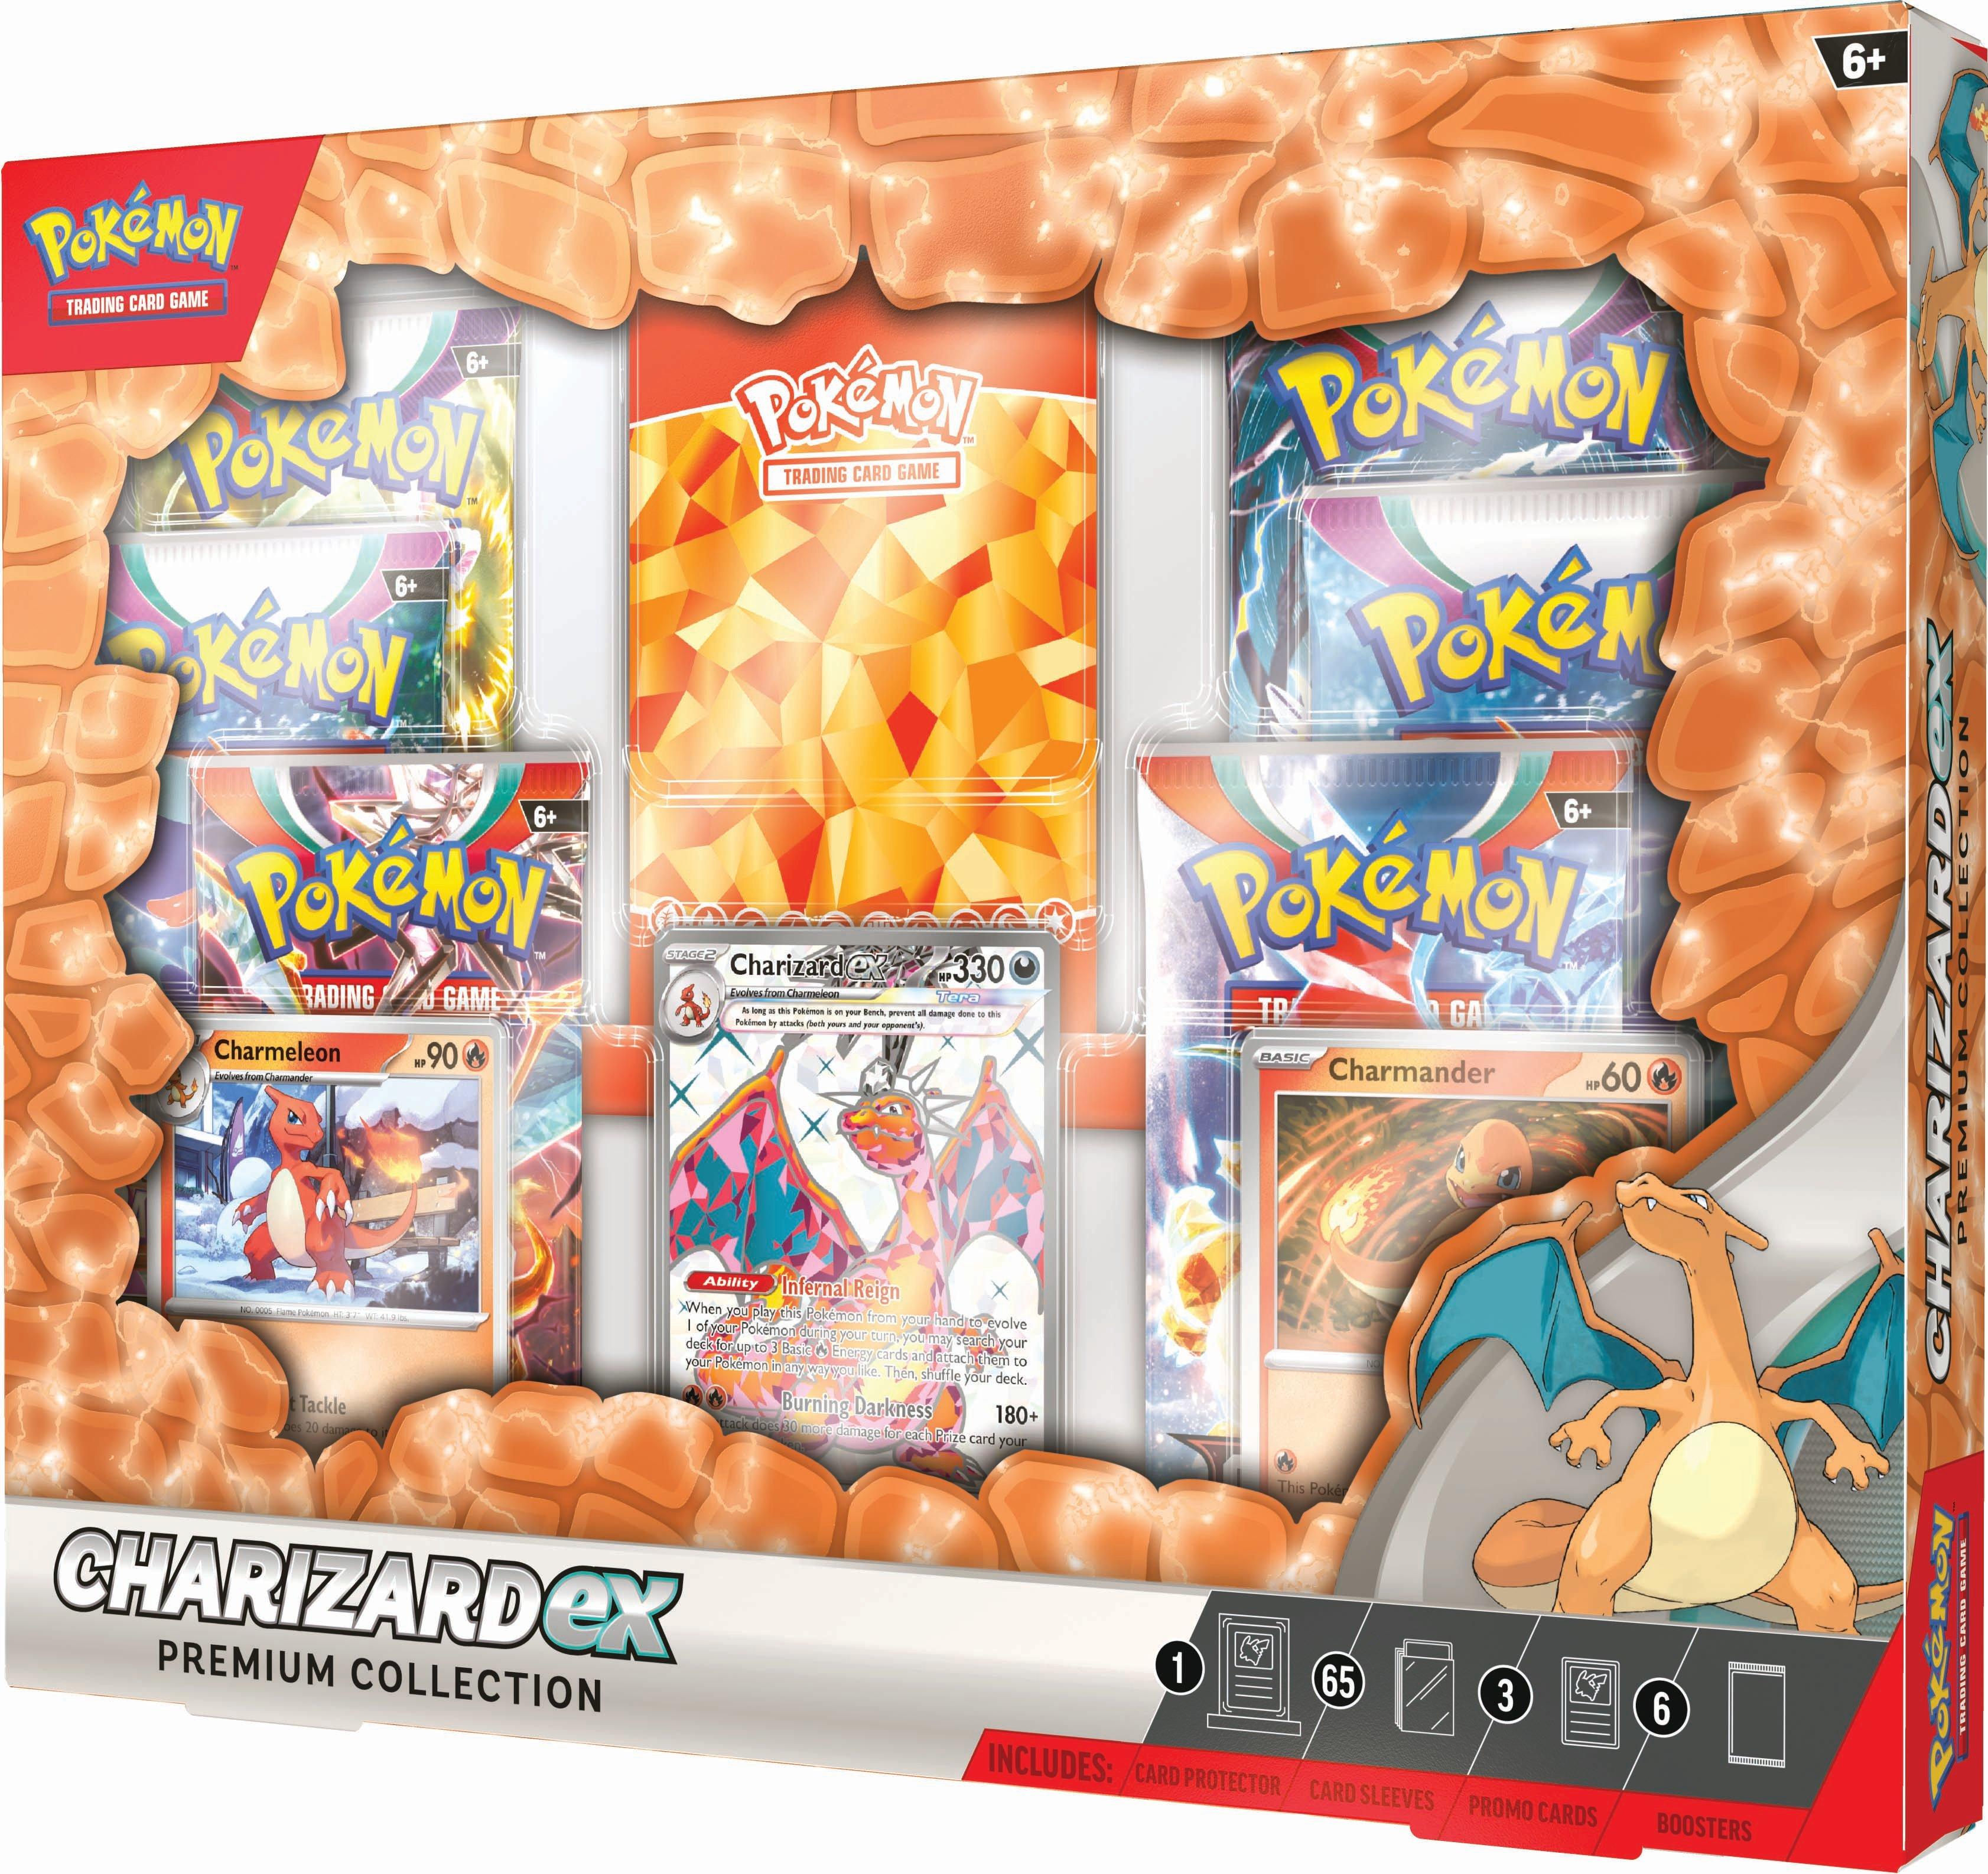 Pokémon Charizard card sells for $183,000 at auction, goes to